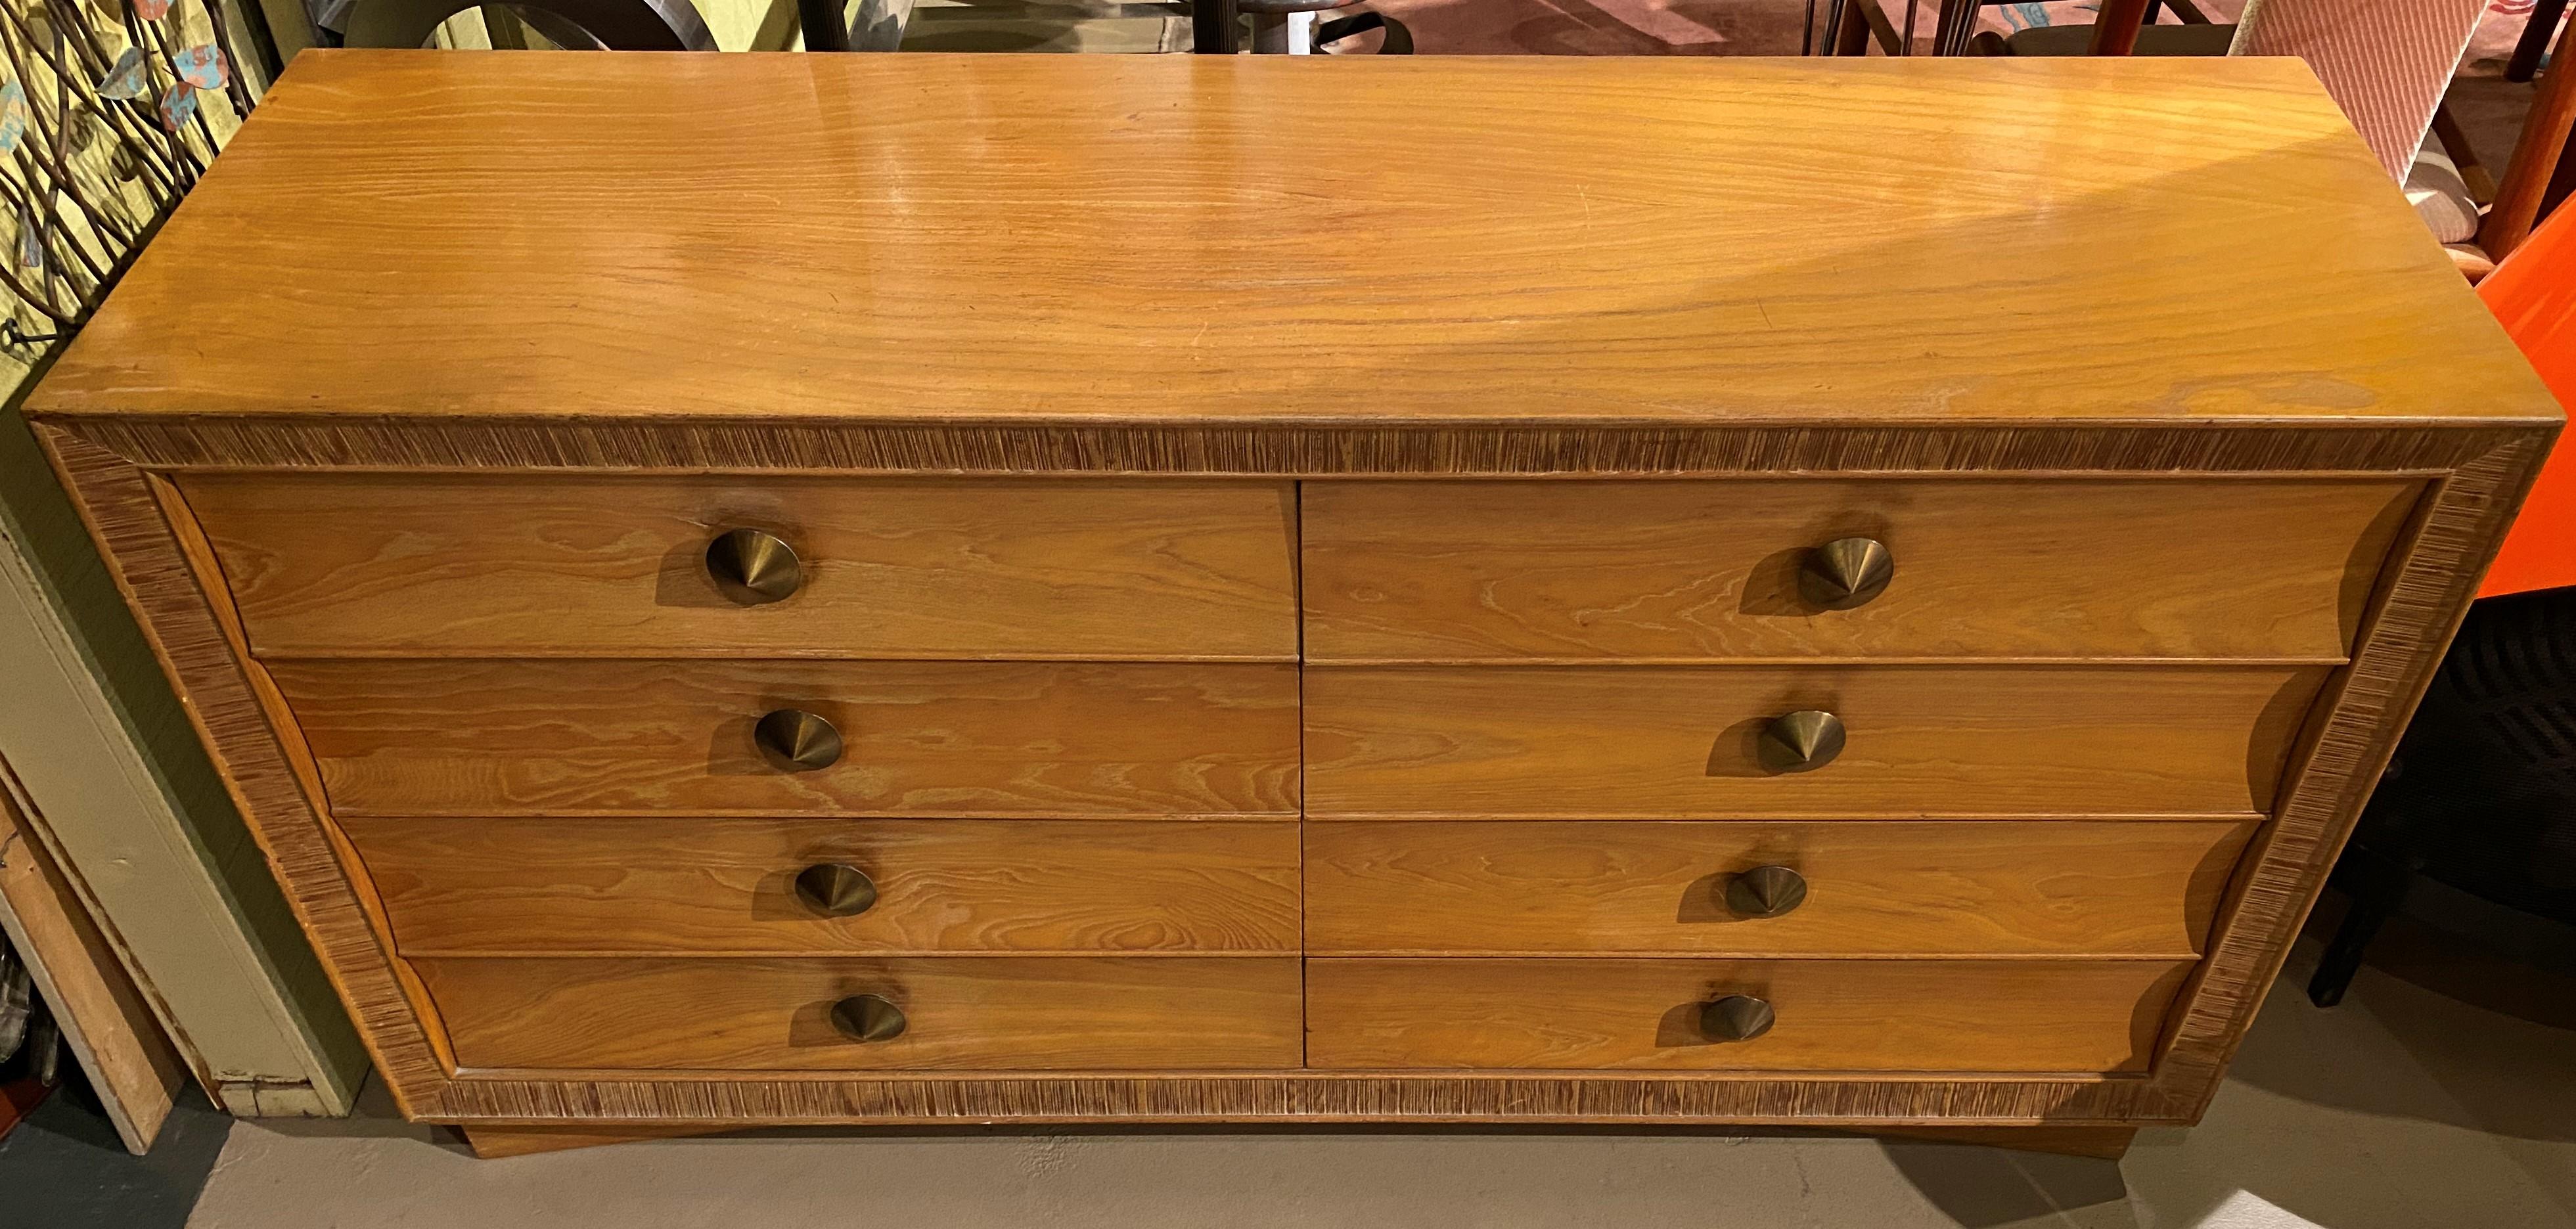 A splendid mid century eight-drawer oak dresser or chest of drawers created by Austrian designer Paul Frankl (1886-1958), well known for his Art Deco and “skyscraper” furniture. This combed oak bordered dresser features bold pulls and a nicely